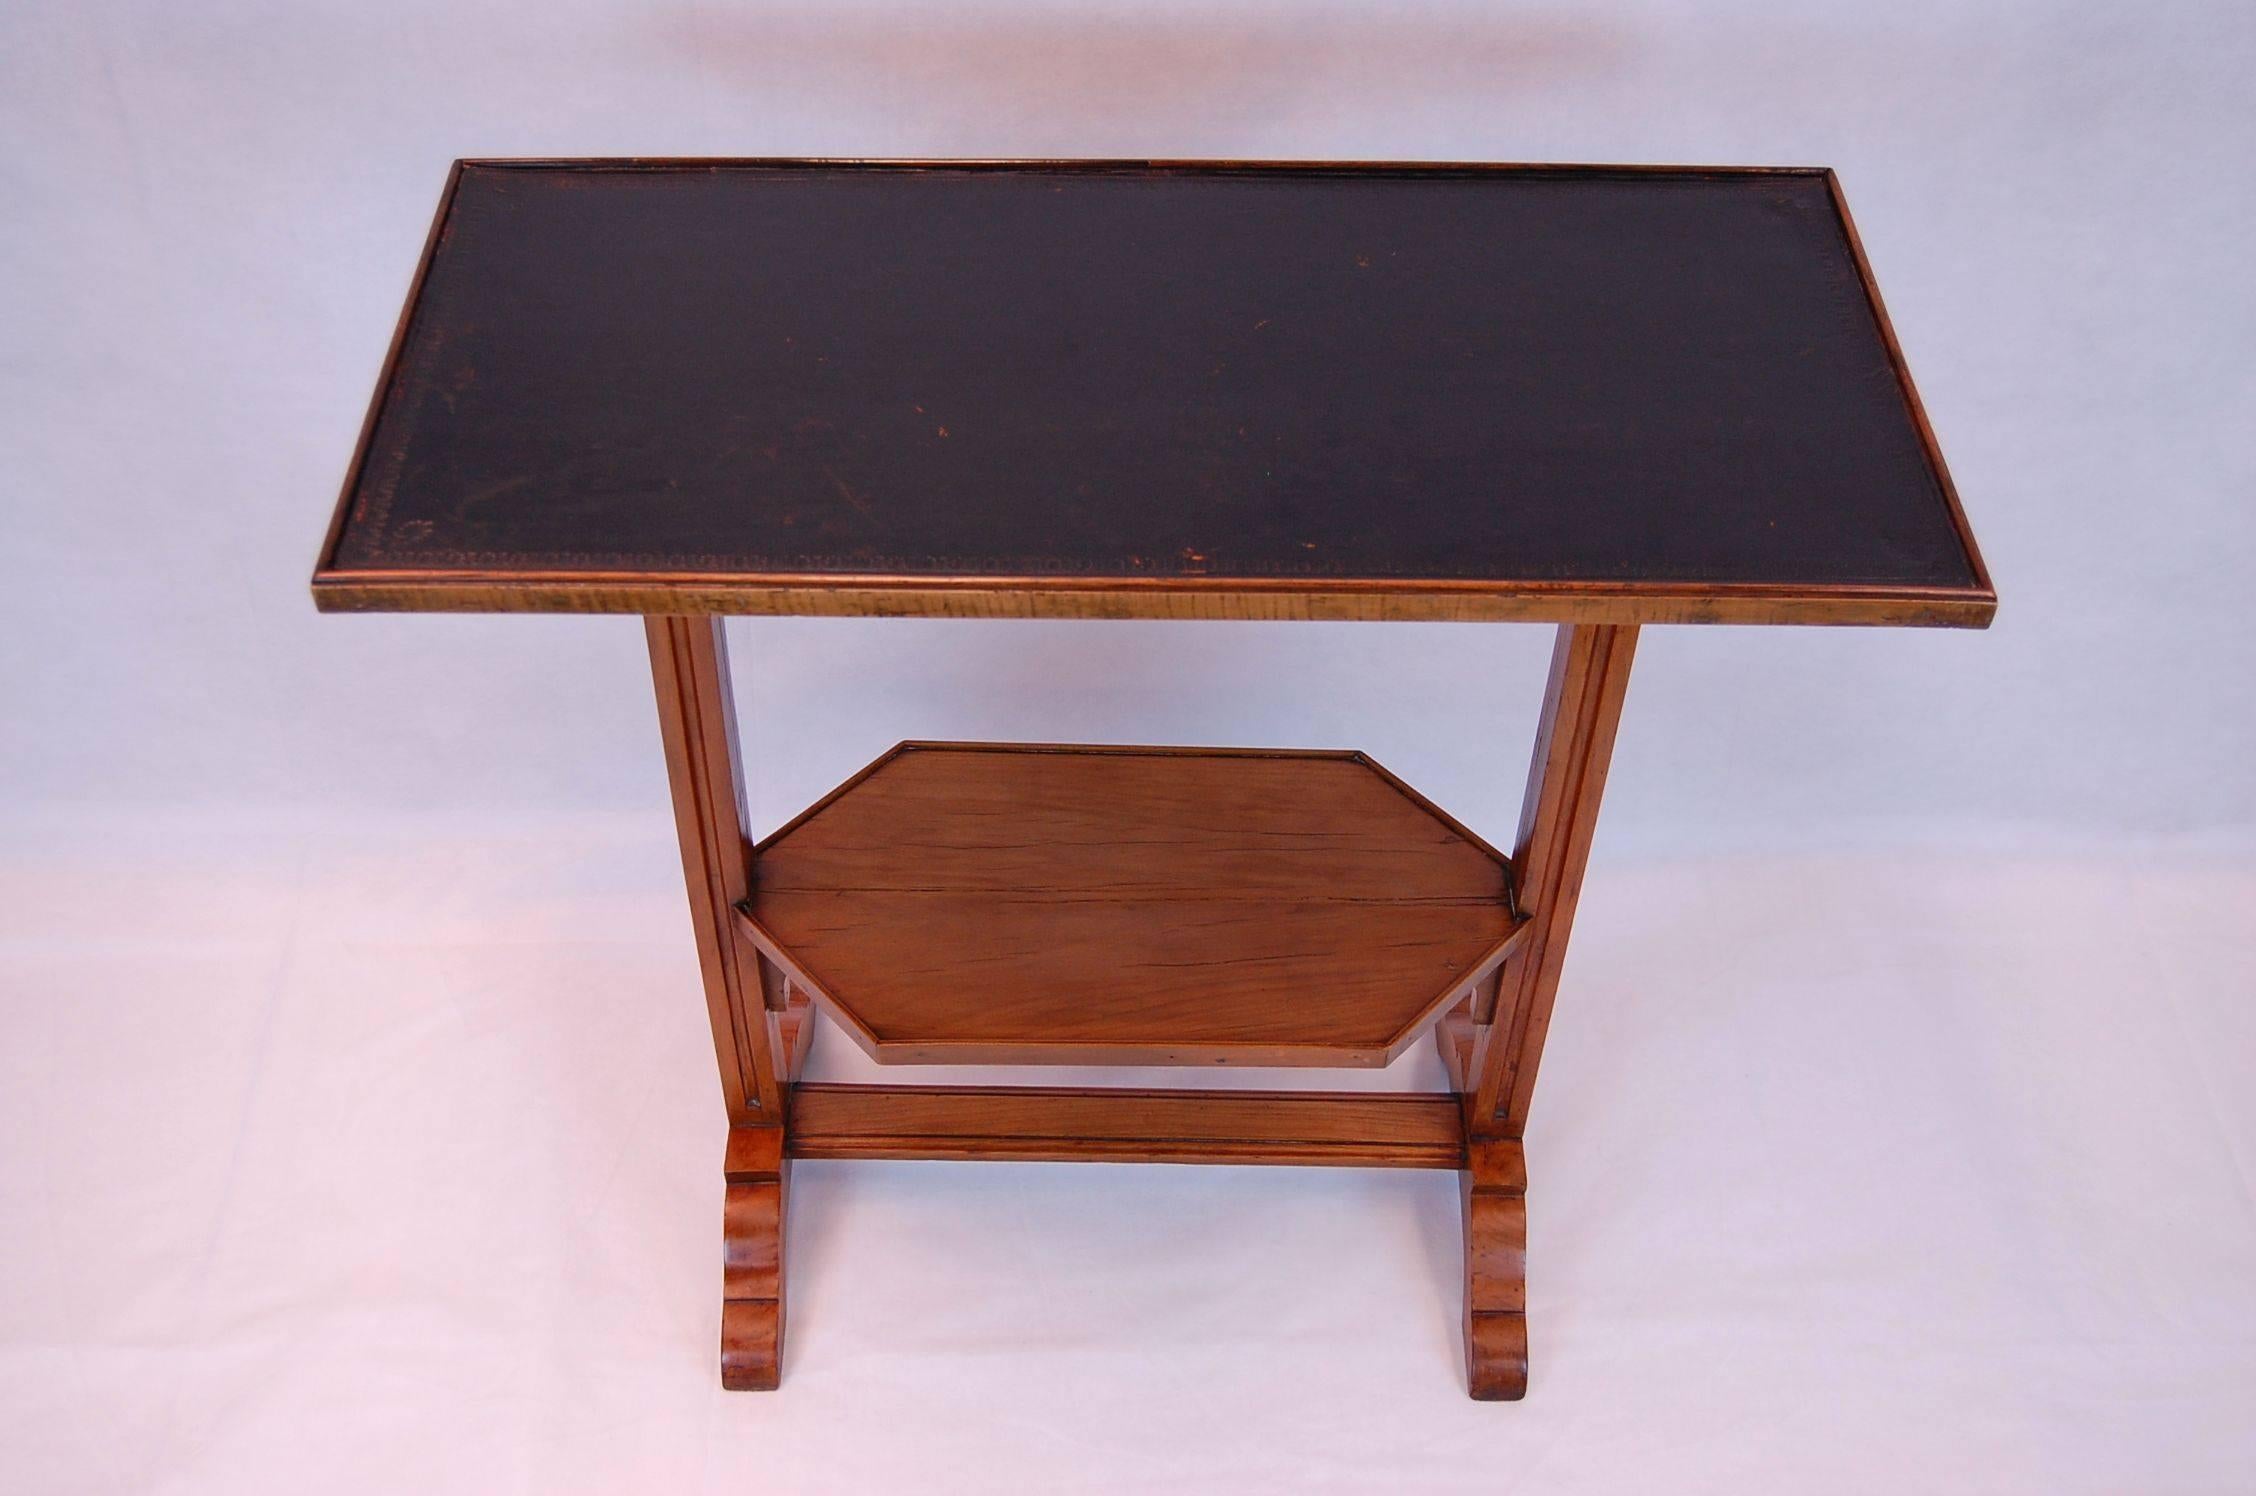 English 19th Century French Directoire Style Rectangular Side Table with Leather Top